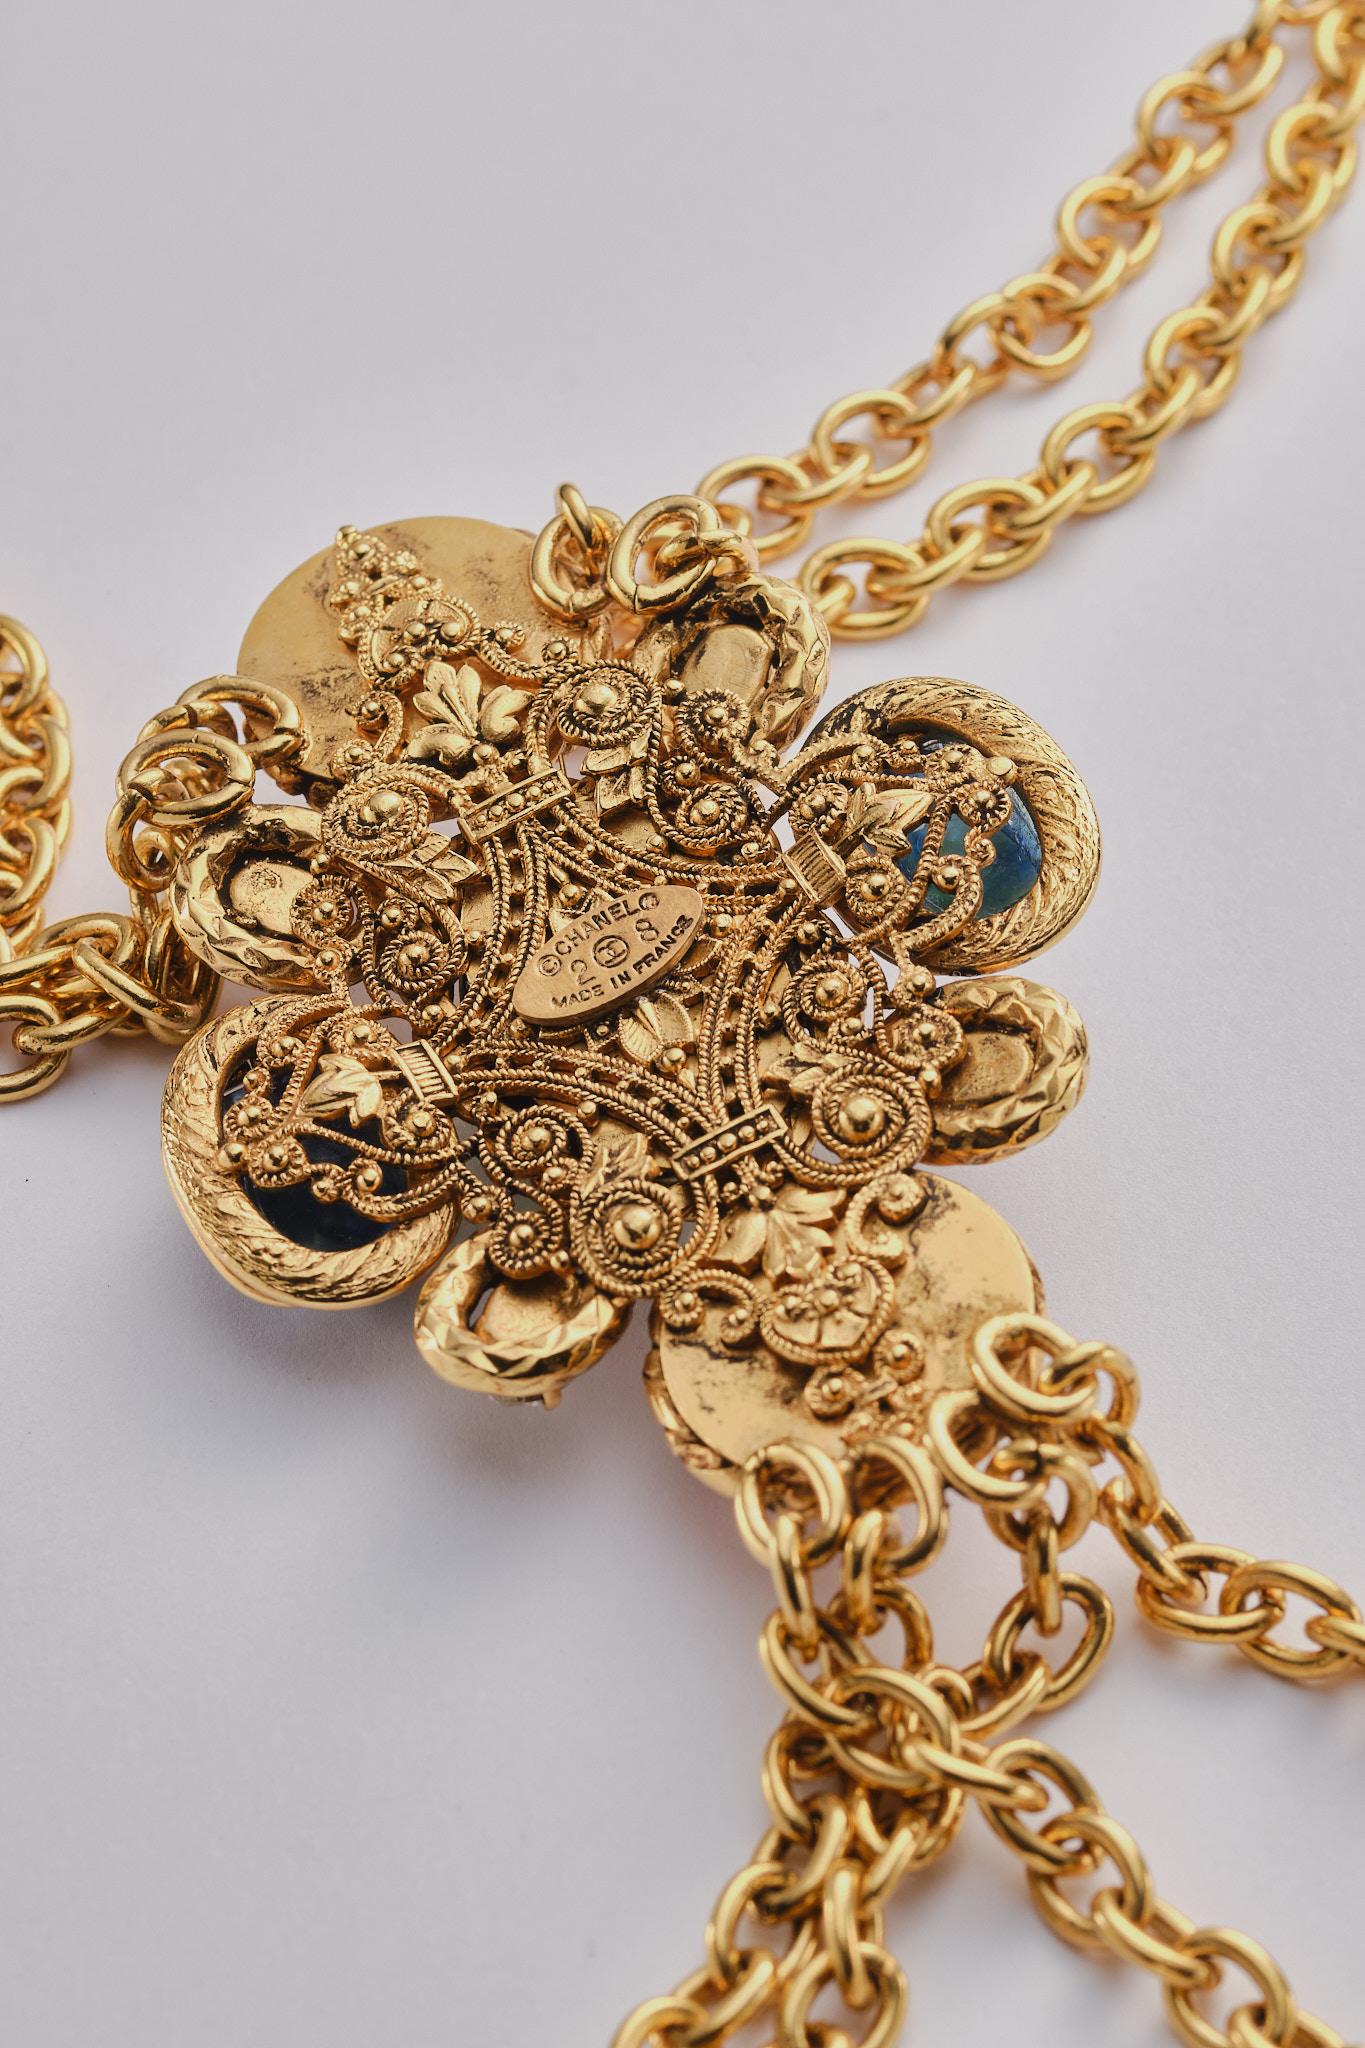 Chanel necklace by R. Goossens and Gripoix Paris signed 2CC8 gold plated In Excellent Condition For Sale In Stuttgart, DE